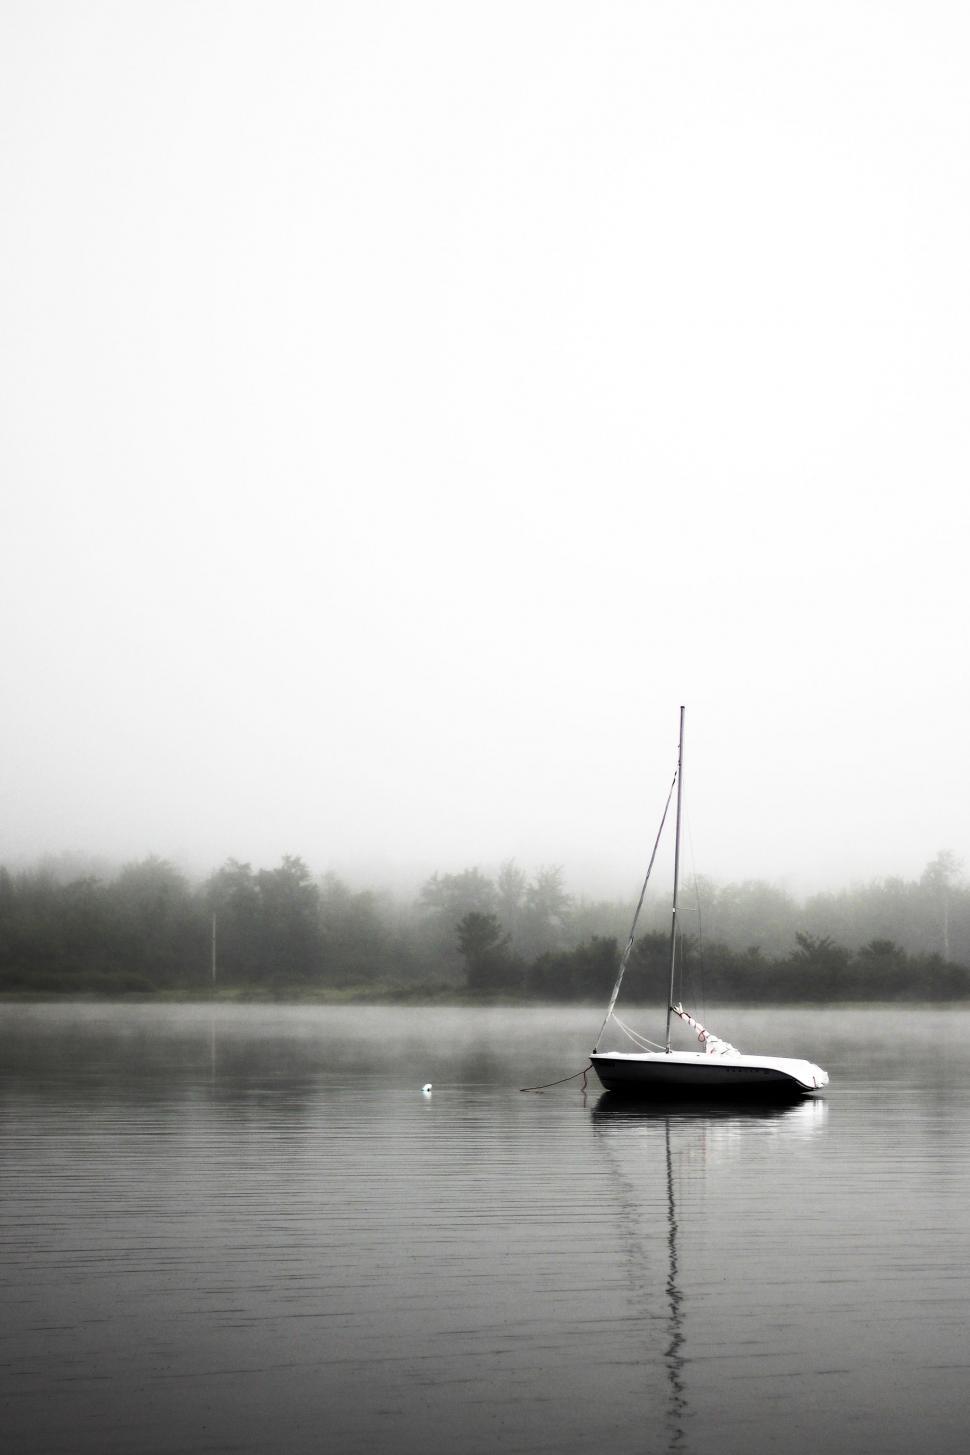 Free Image of Boat Floating on Lake Covered in Fog 